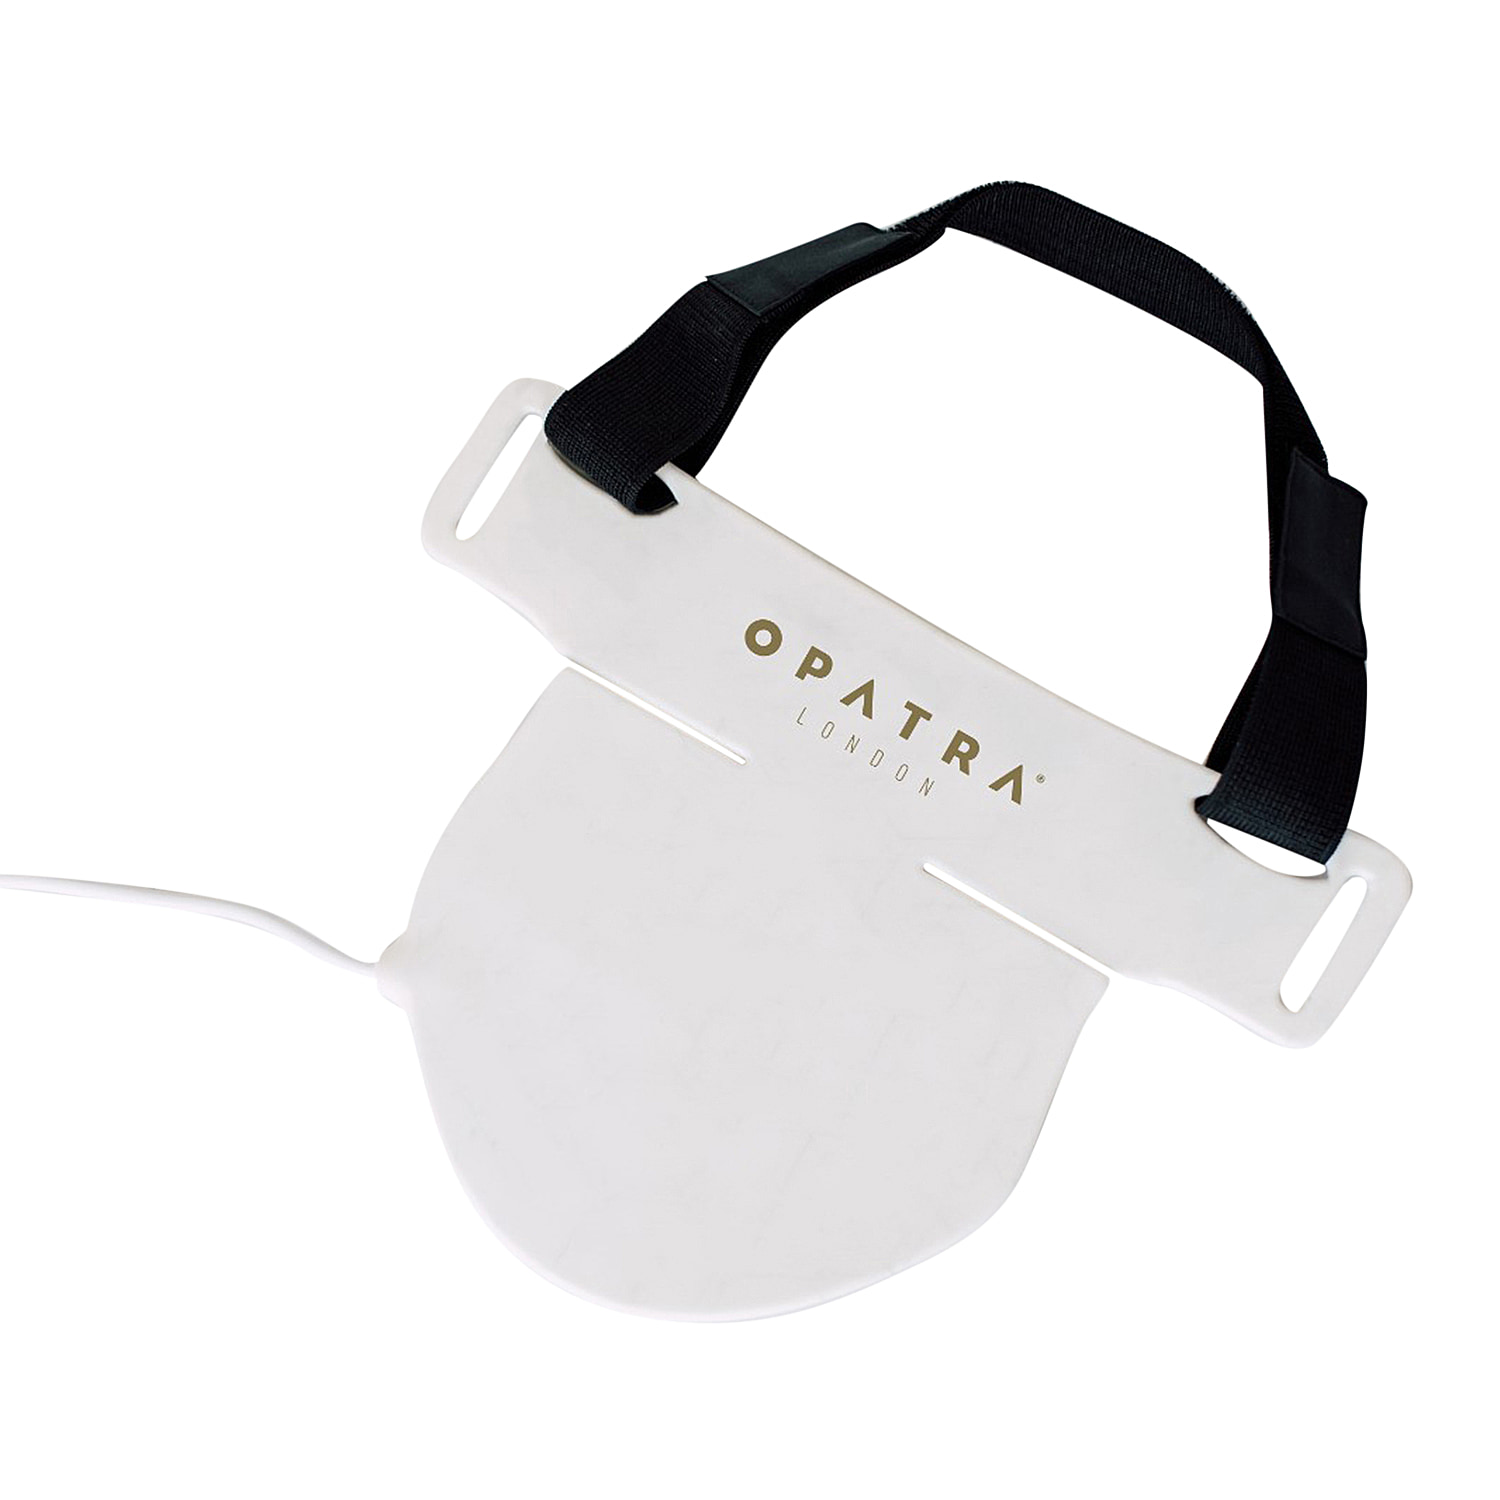 Opatra Advanced Skincare Technologies: NECollage - Light Therapy for Neck & Décolletage